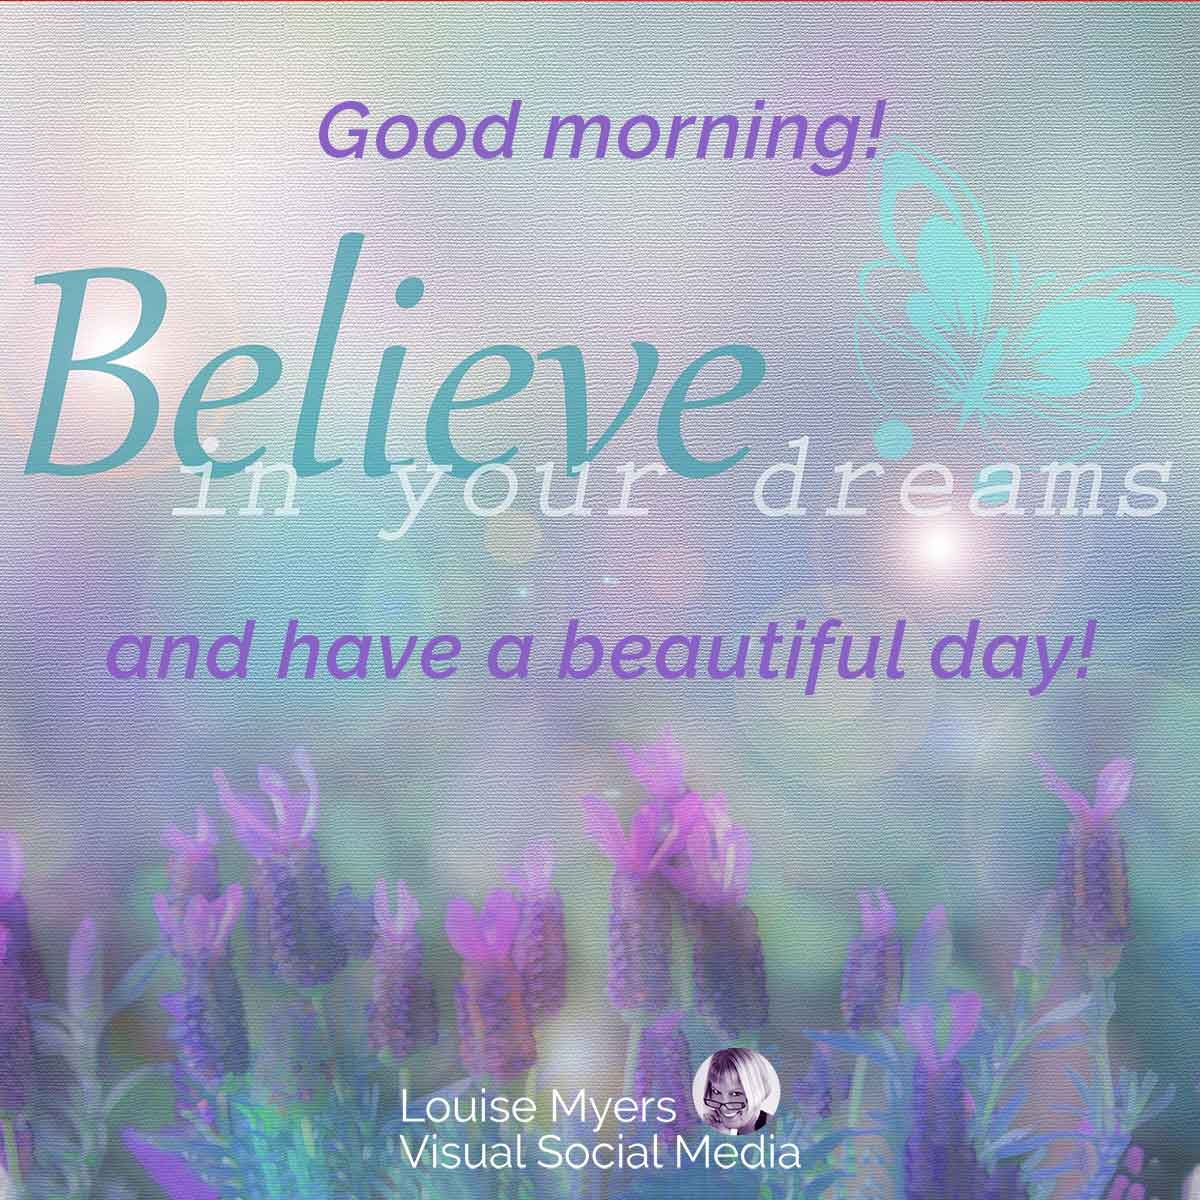 lavender flowers on aqua watercolor background says good morning, believe in your dreams and have a beautiful day.